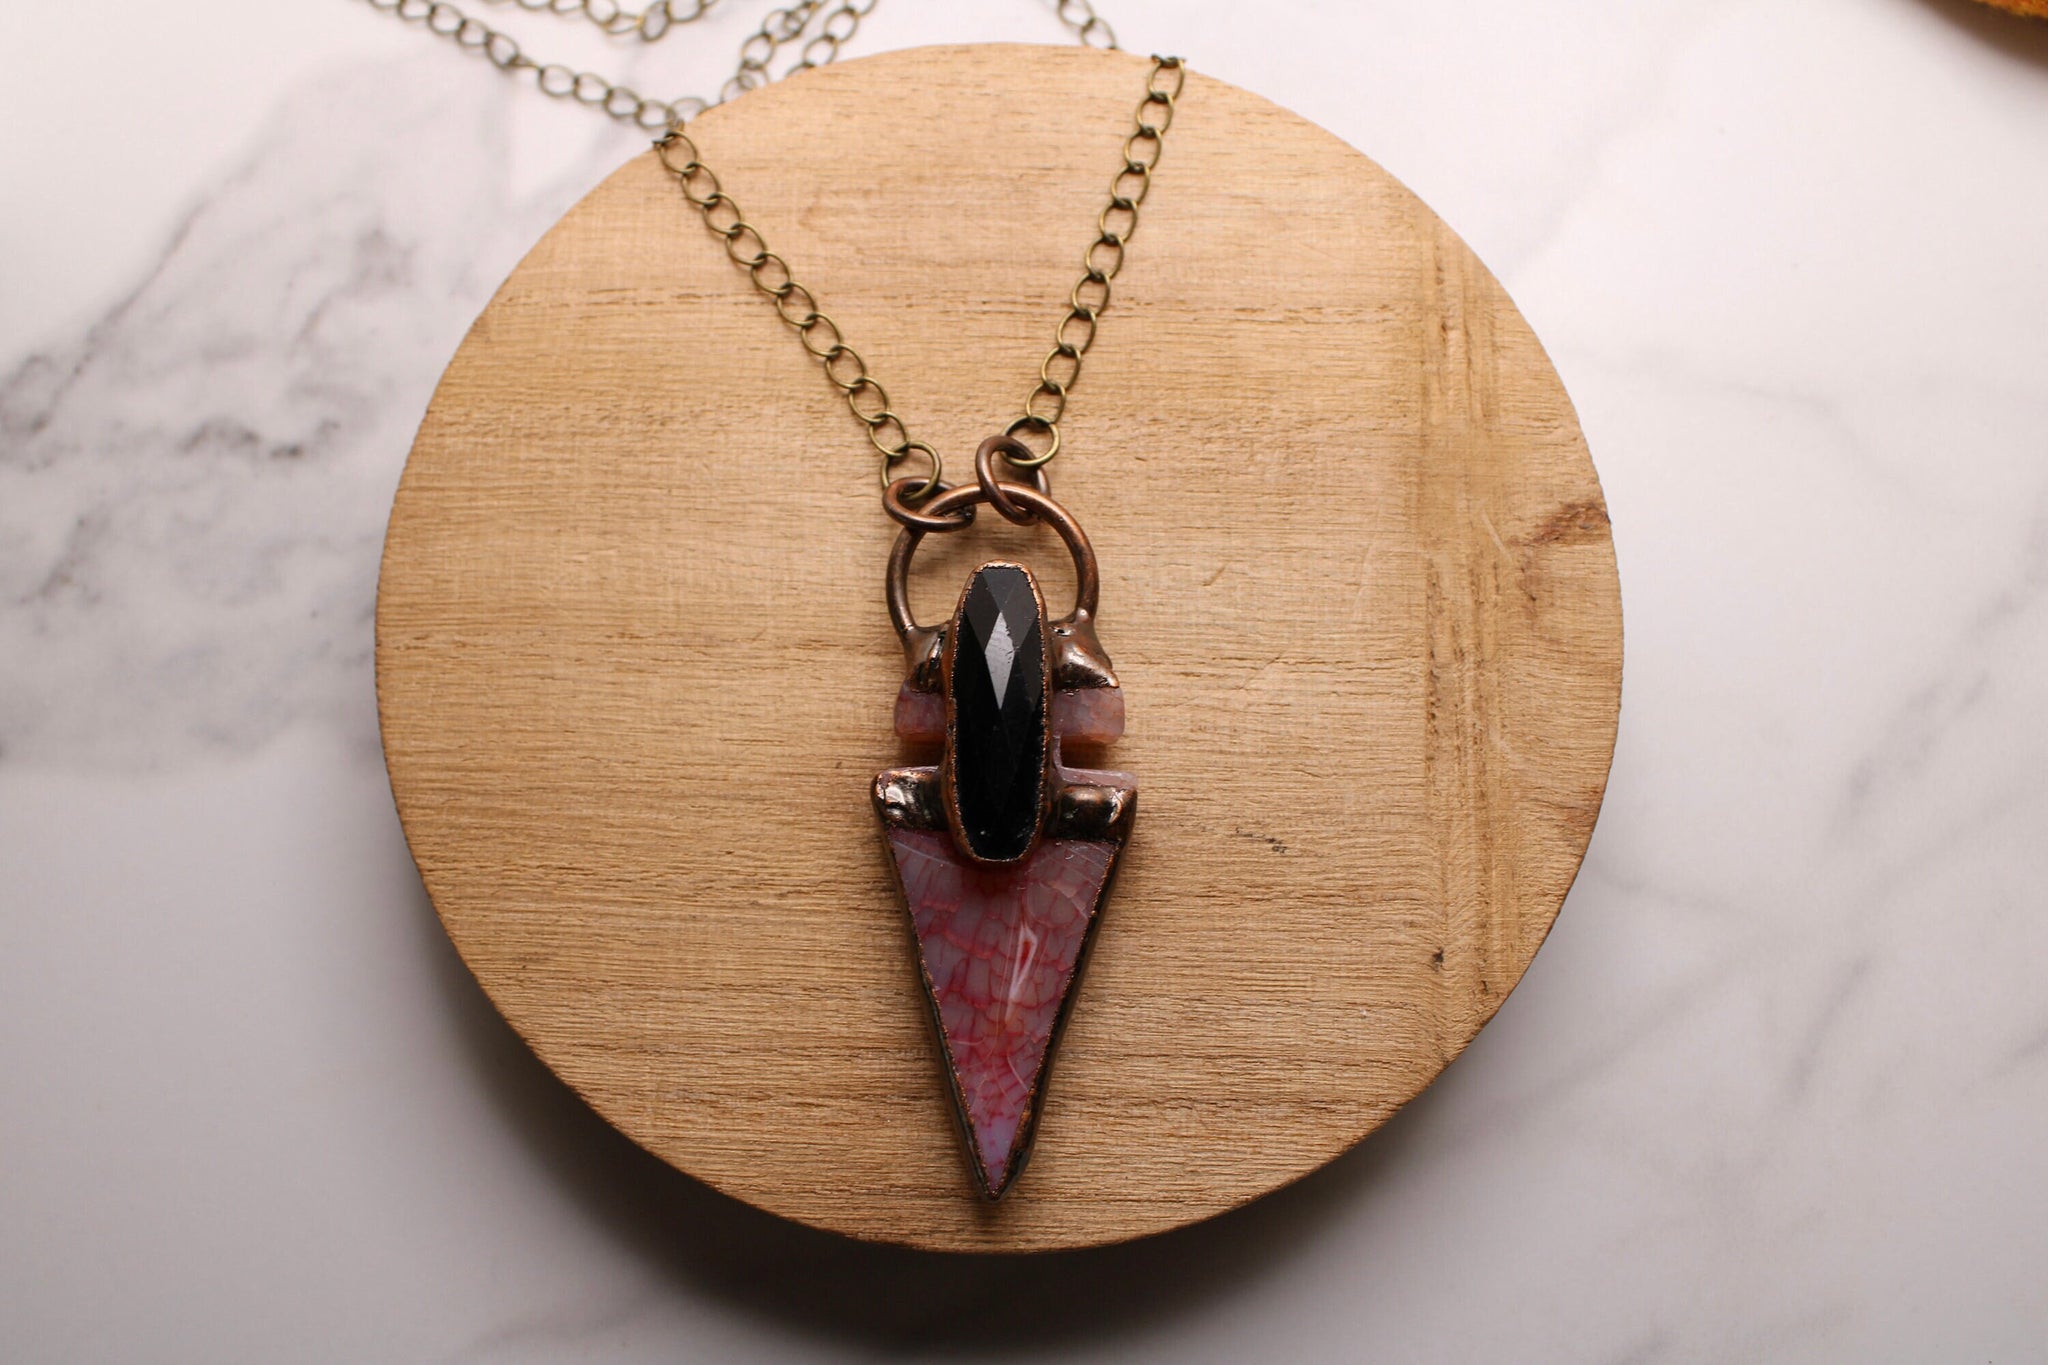 quartz statement necklace, onyx necklace, jewelry, gift, gift for her, bronze necklace, holiday, statement jewelry, gift for mom, triangle